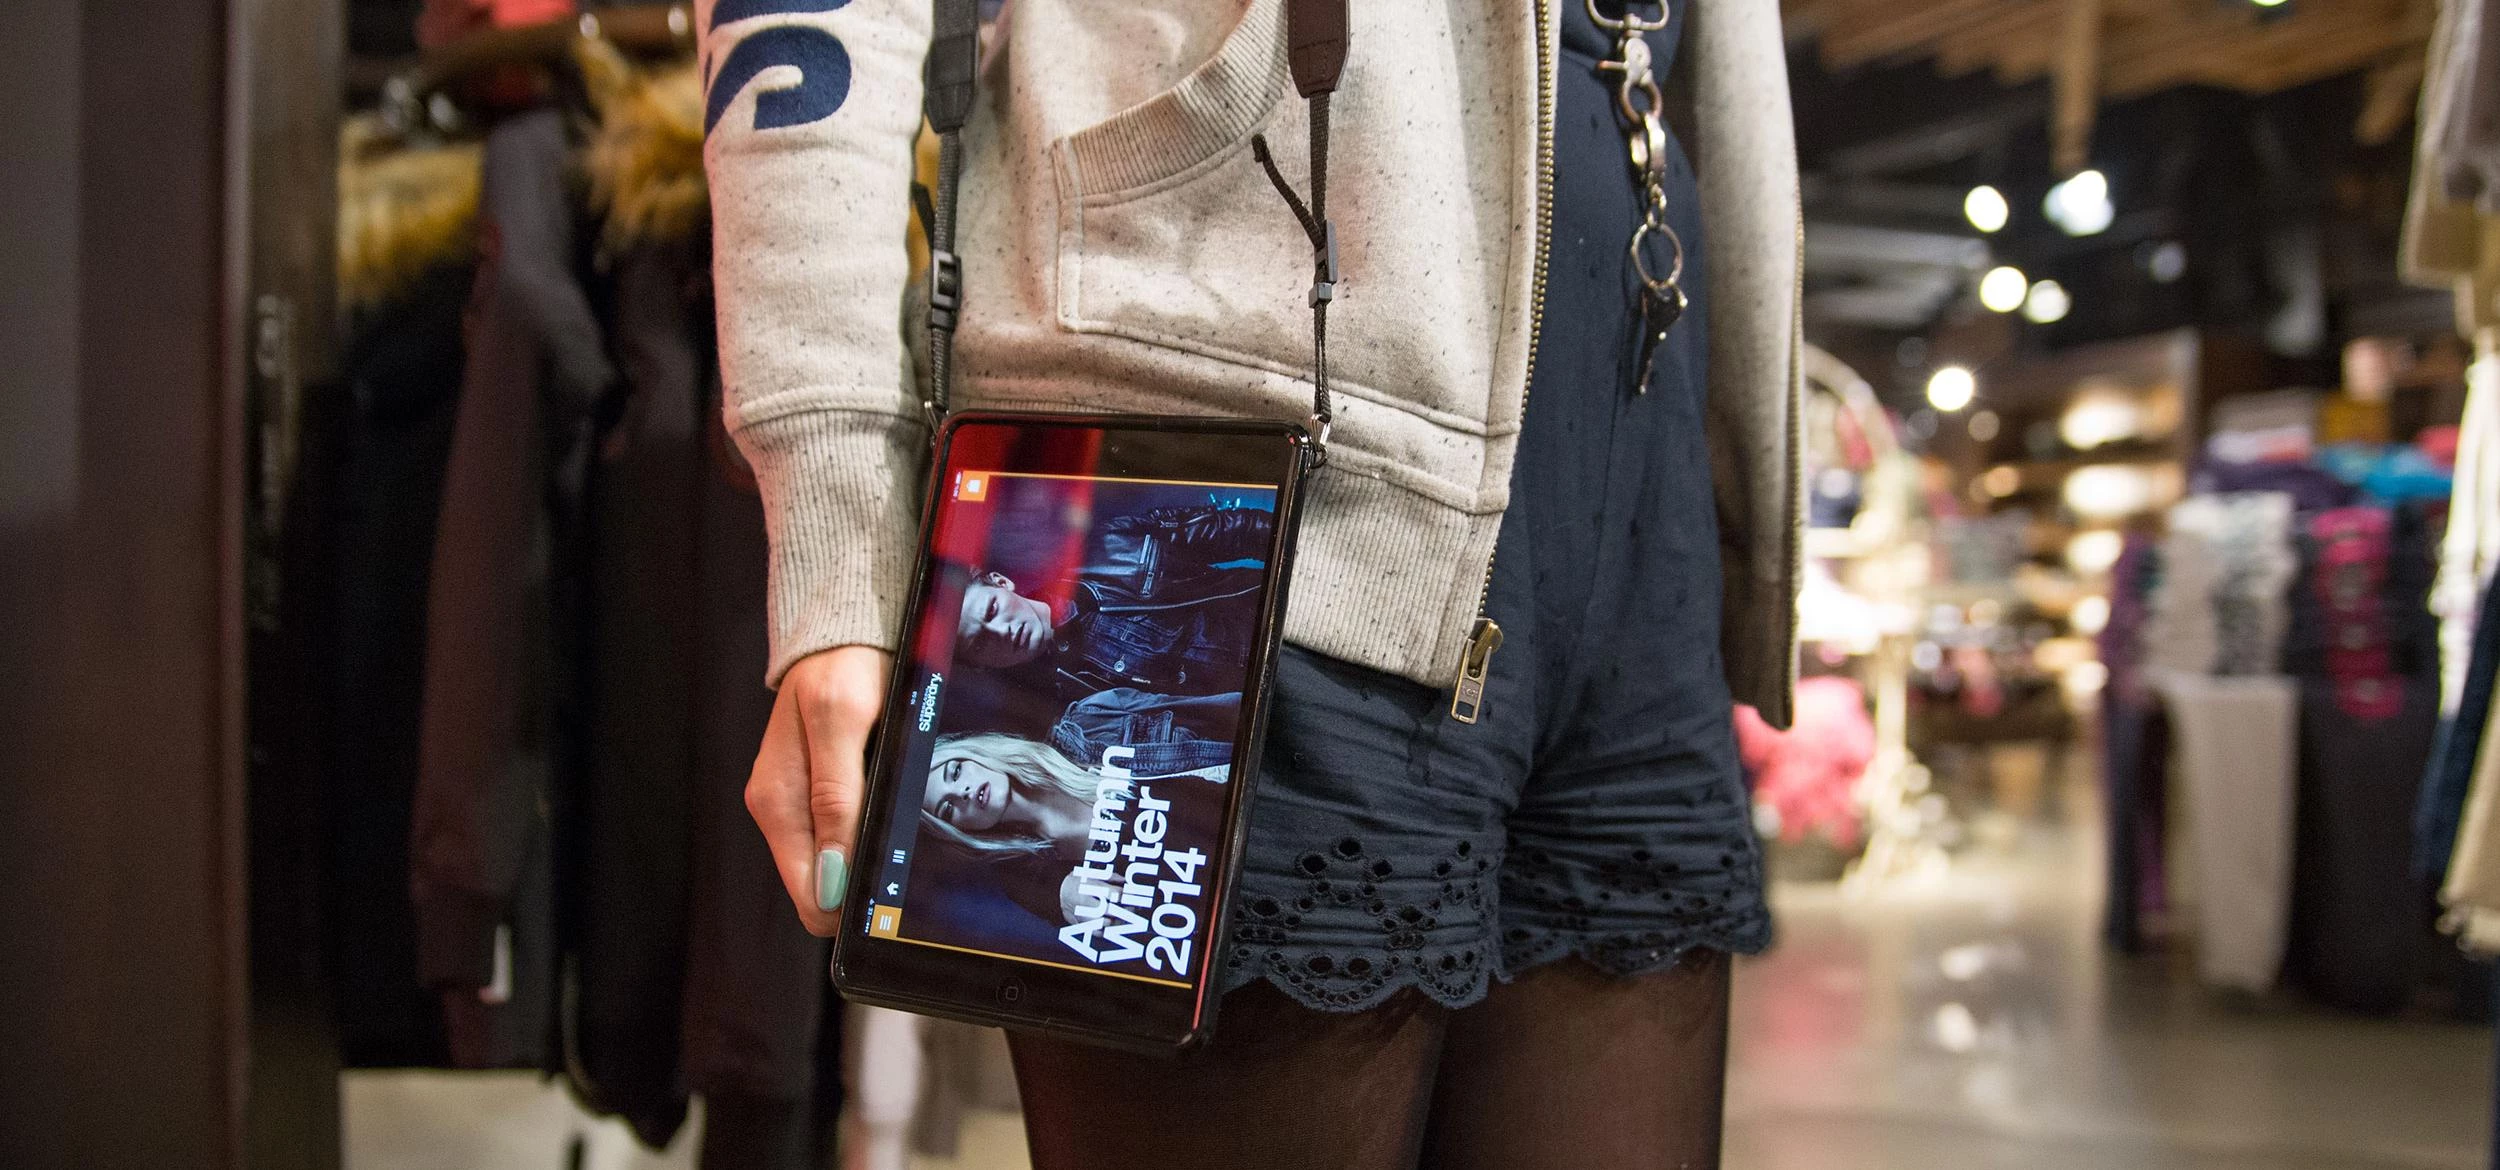 In-store iPads carried by Superdry sales assistants 